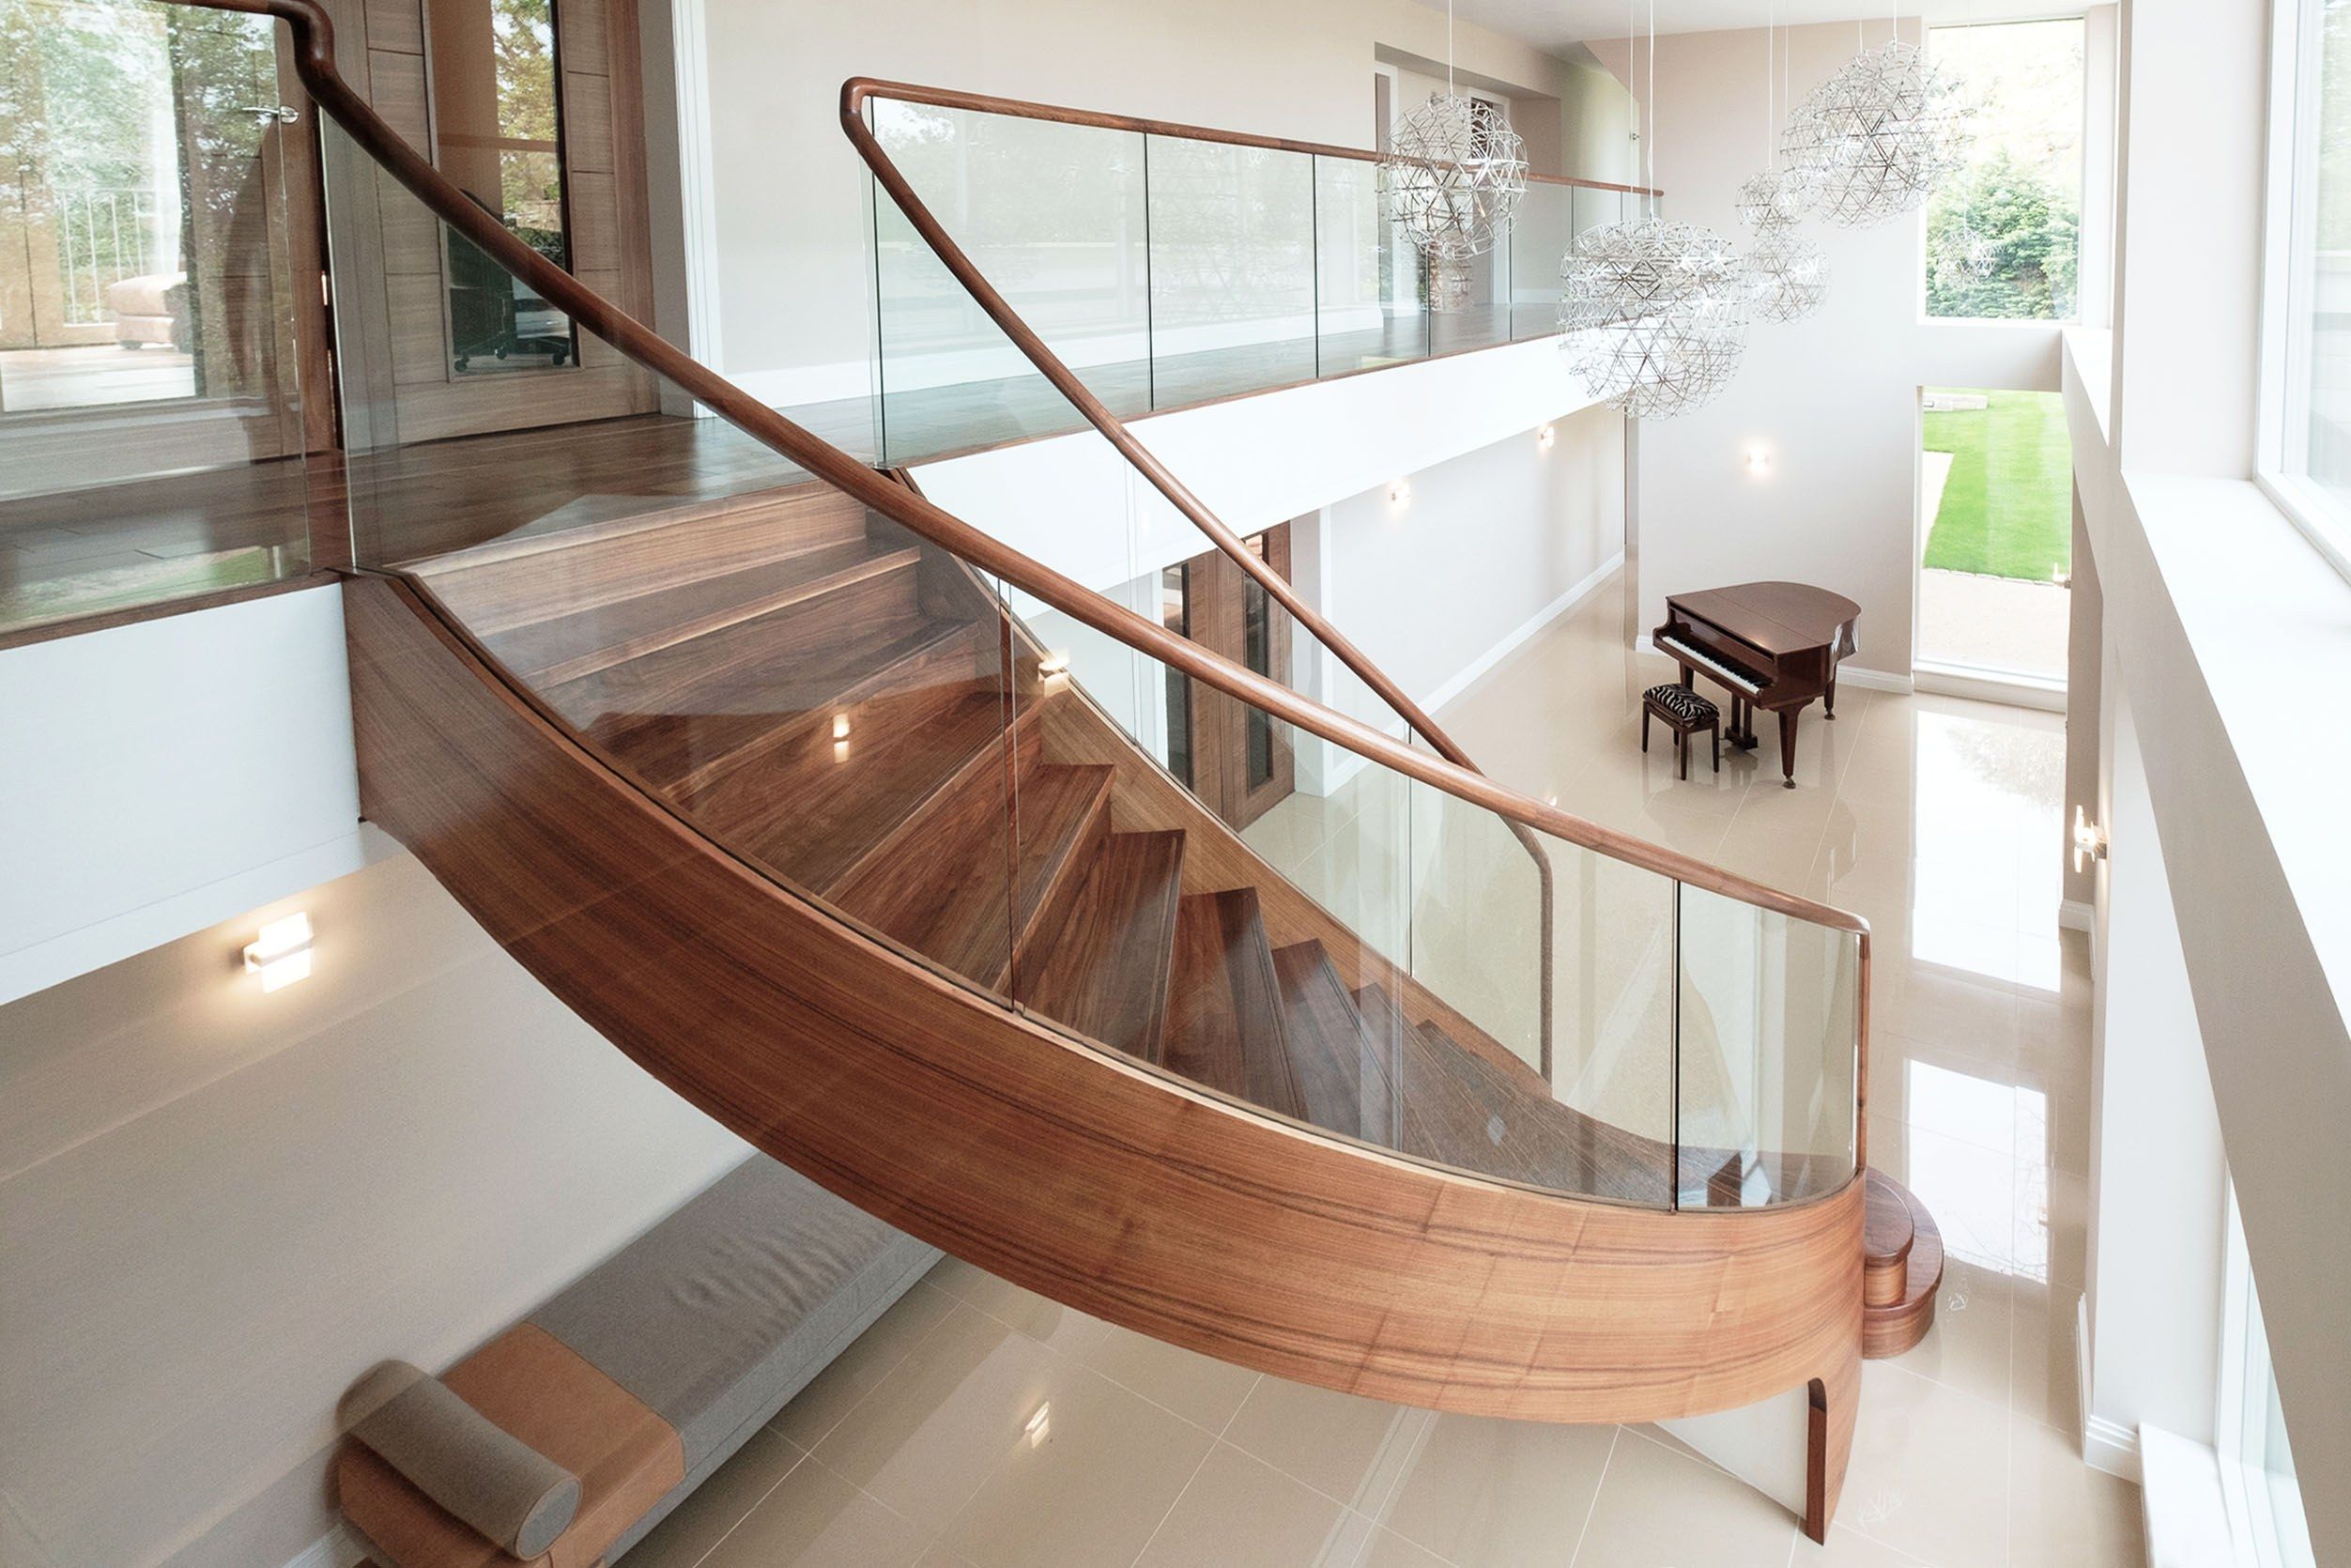 Side view of sweeping curved walnut stair with curved glass and tread lighting in large home with baby grand piano.